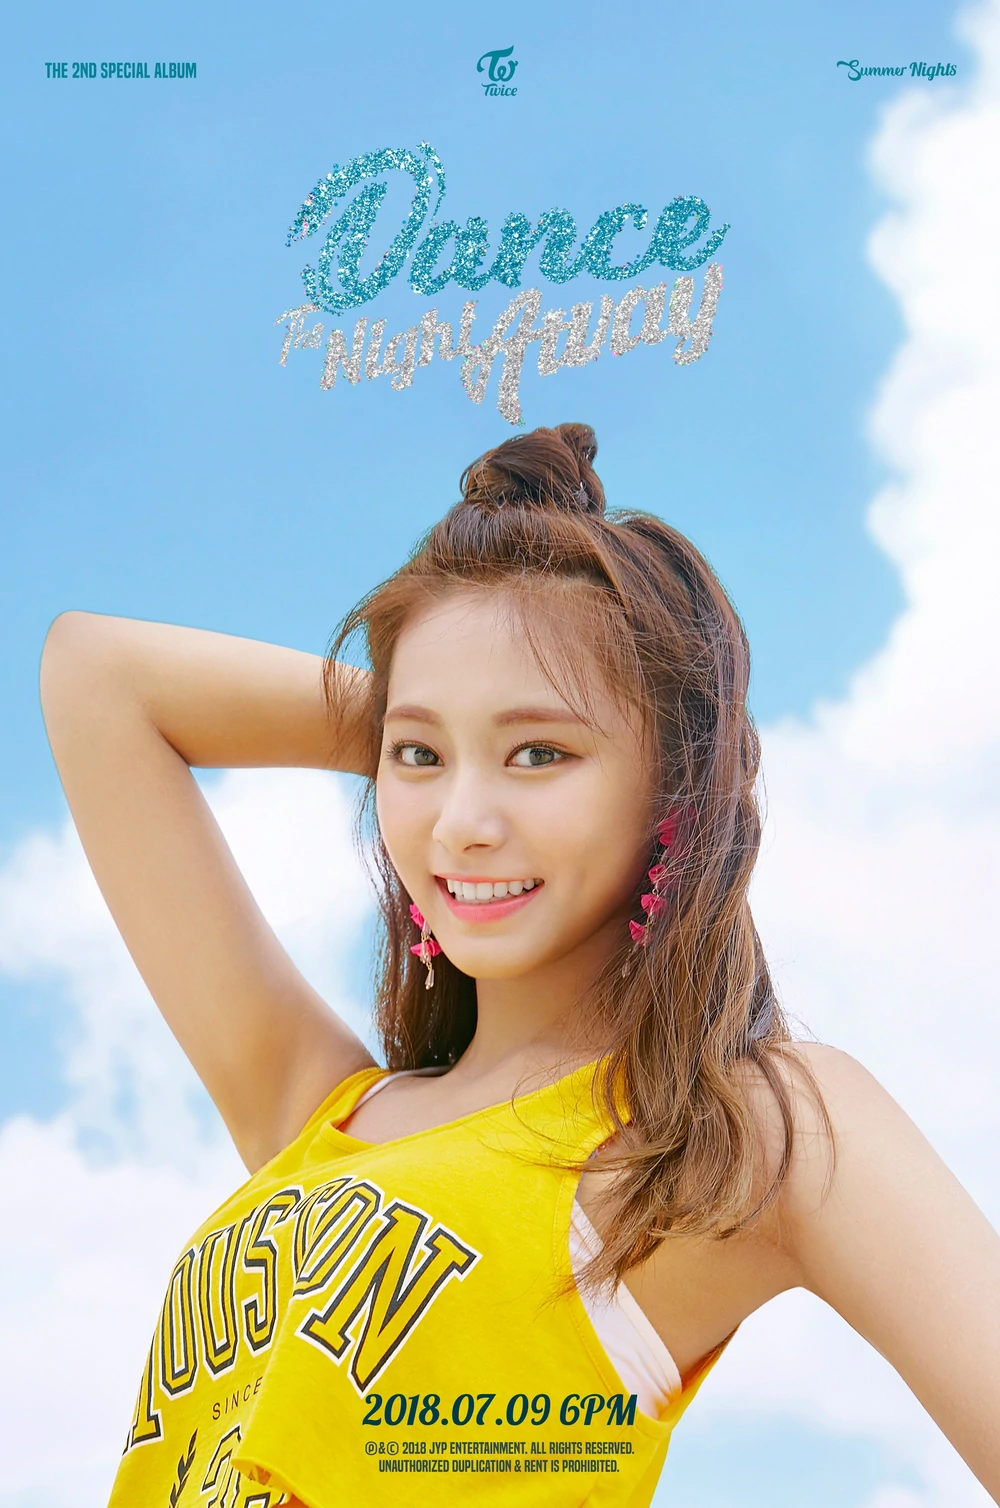 Twice Summer Nights Tzuyu Concept Teaser Picture Image Photo Kpop K-Concept 3